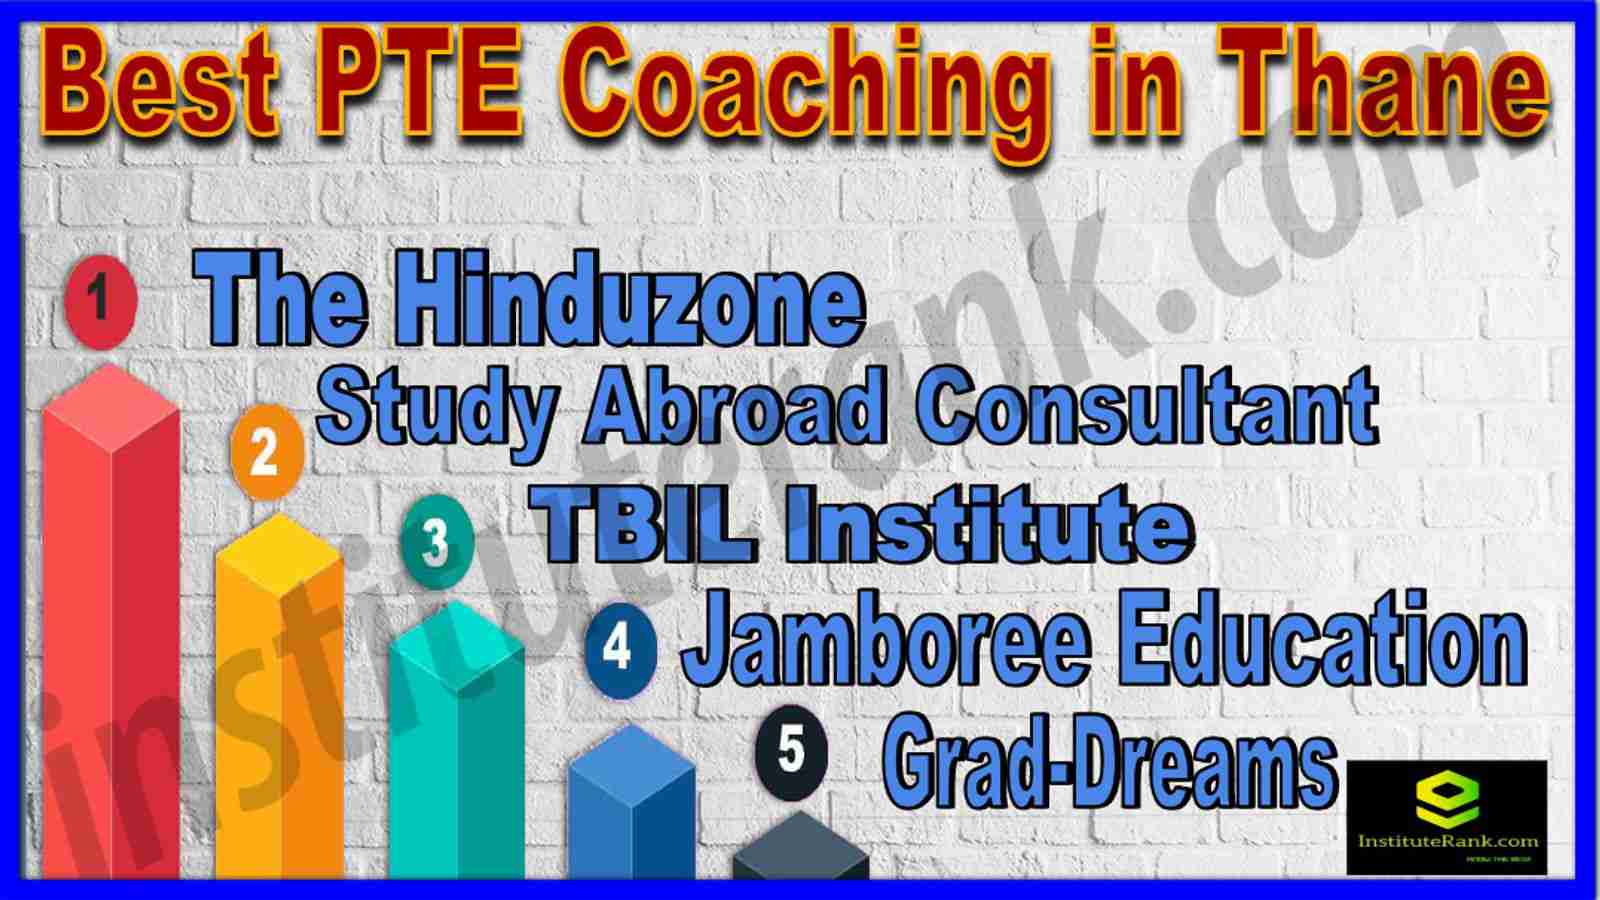 Best PTE Coaching In Thane